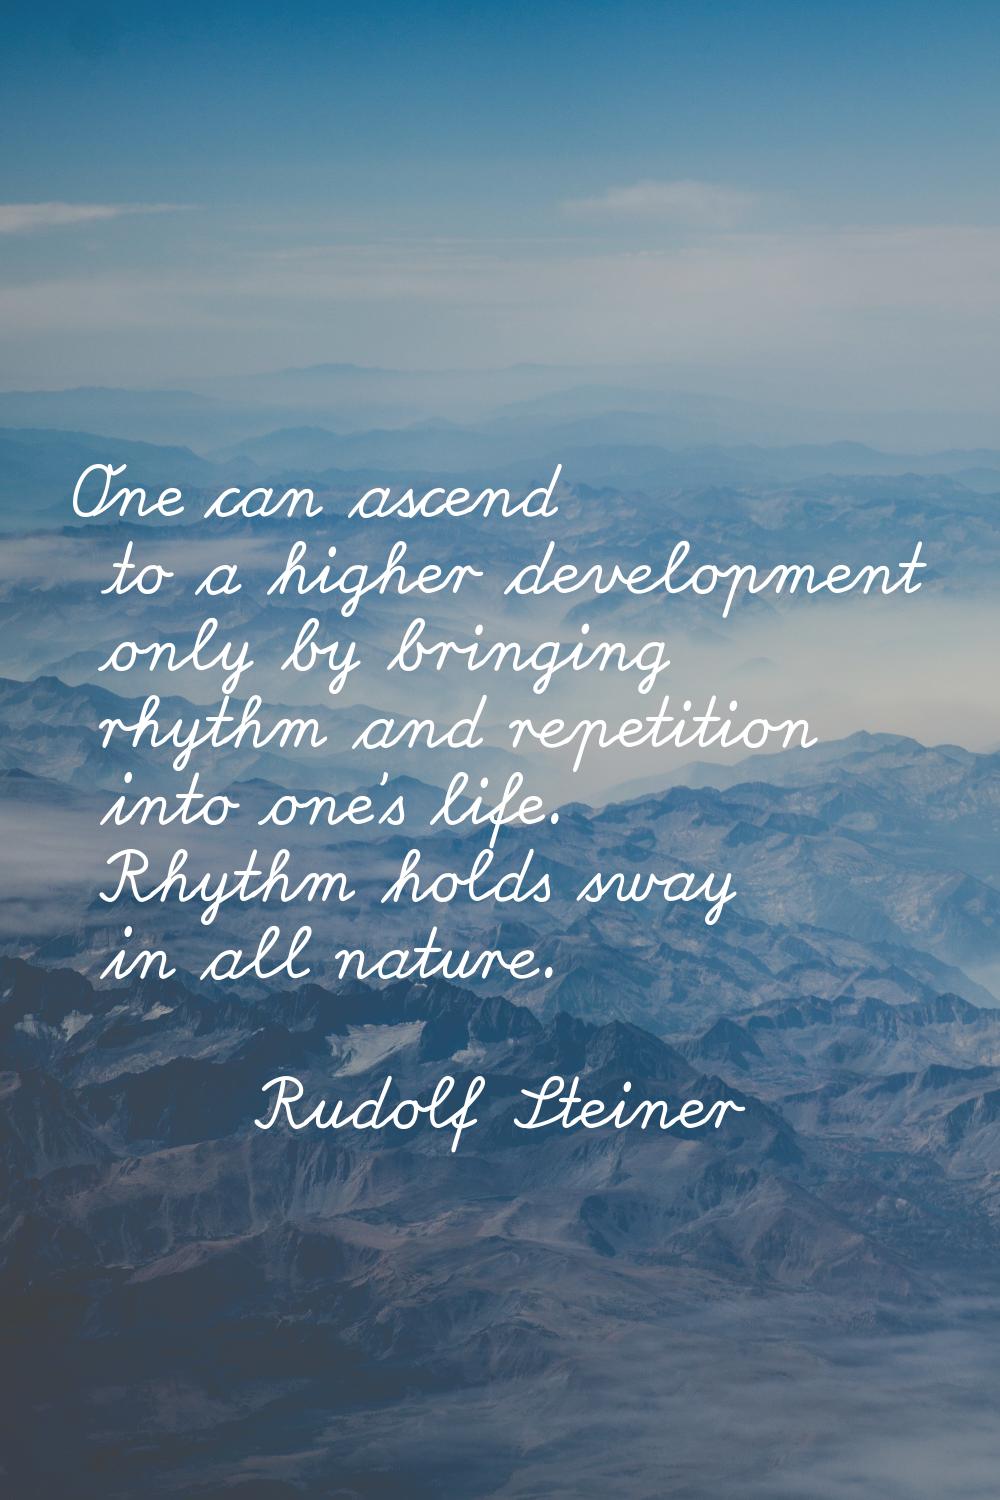 One can ascend to a higher development only by bringing rhythm and repetition into one's life. Rhyt